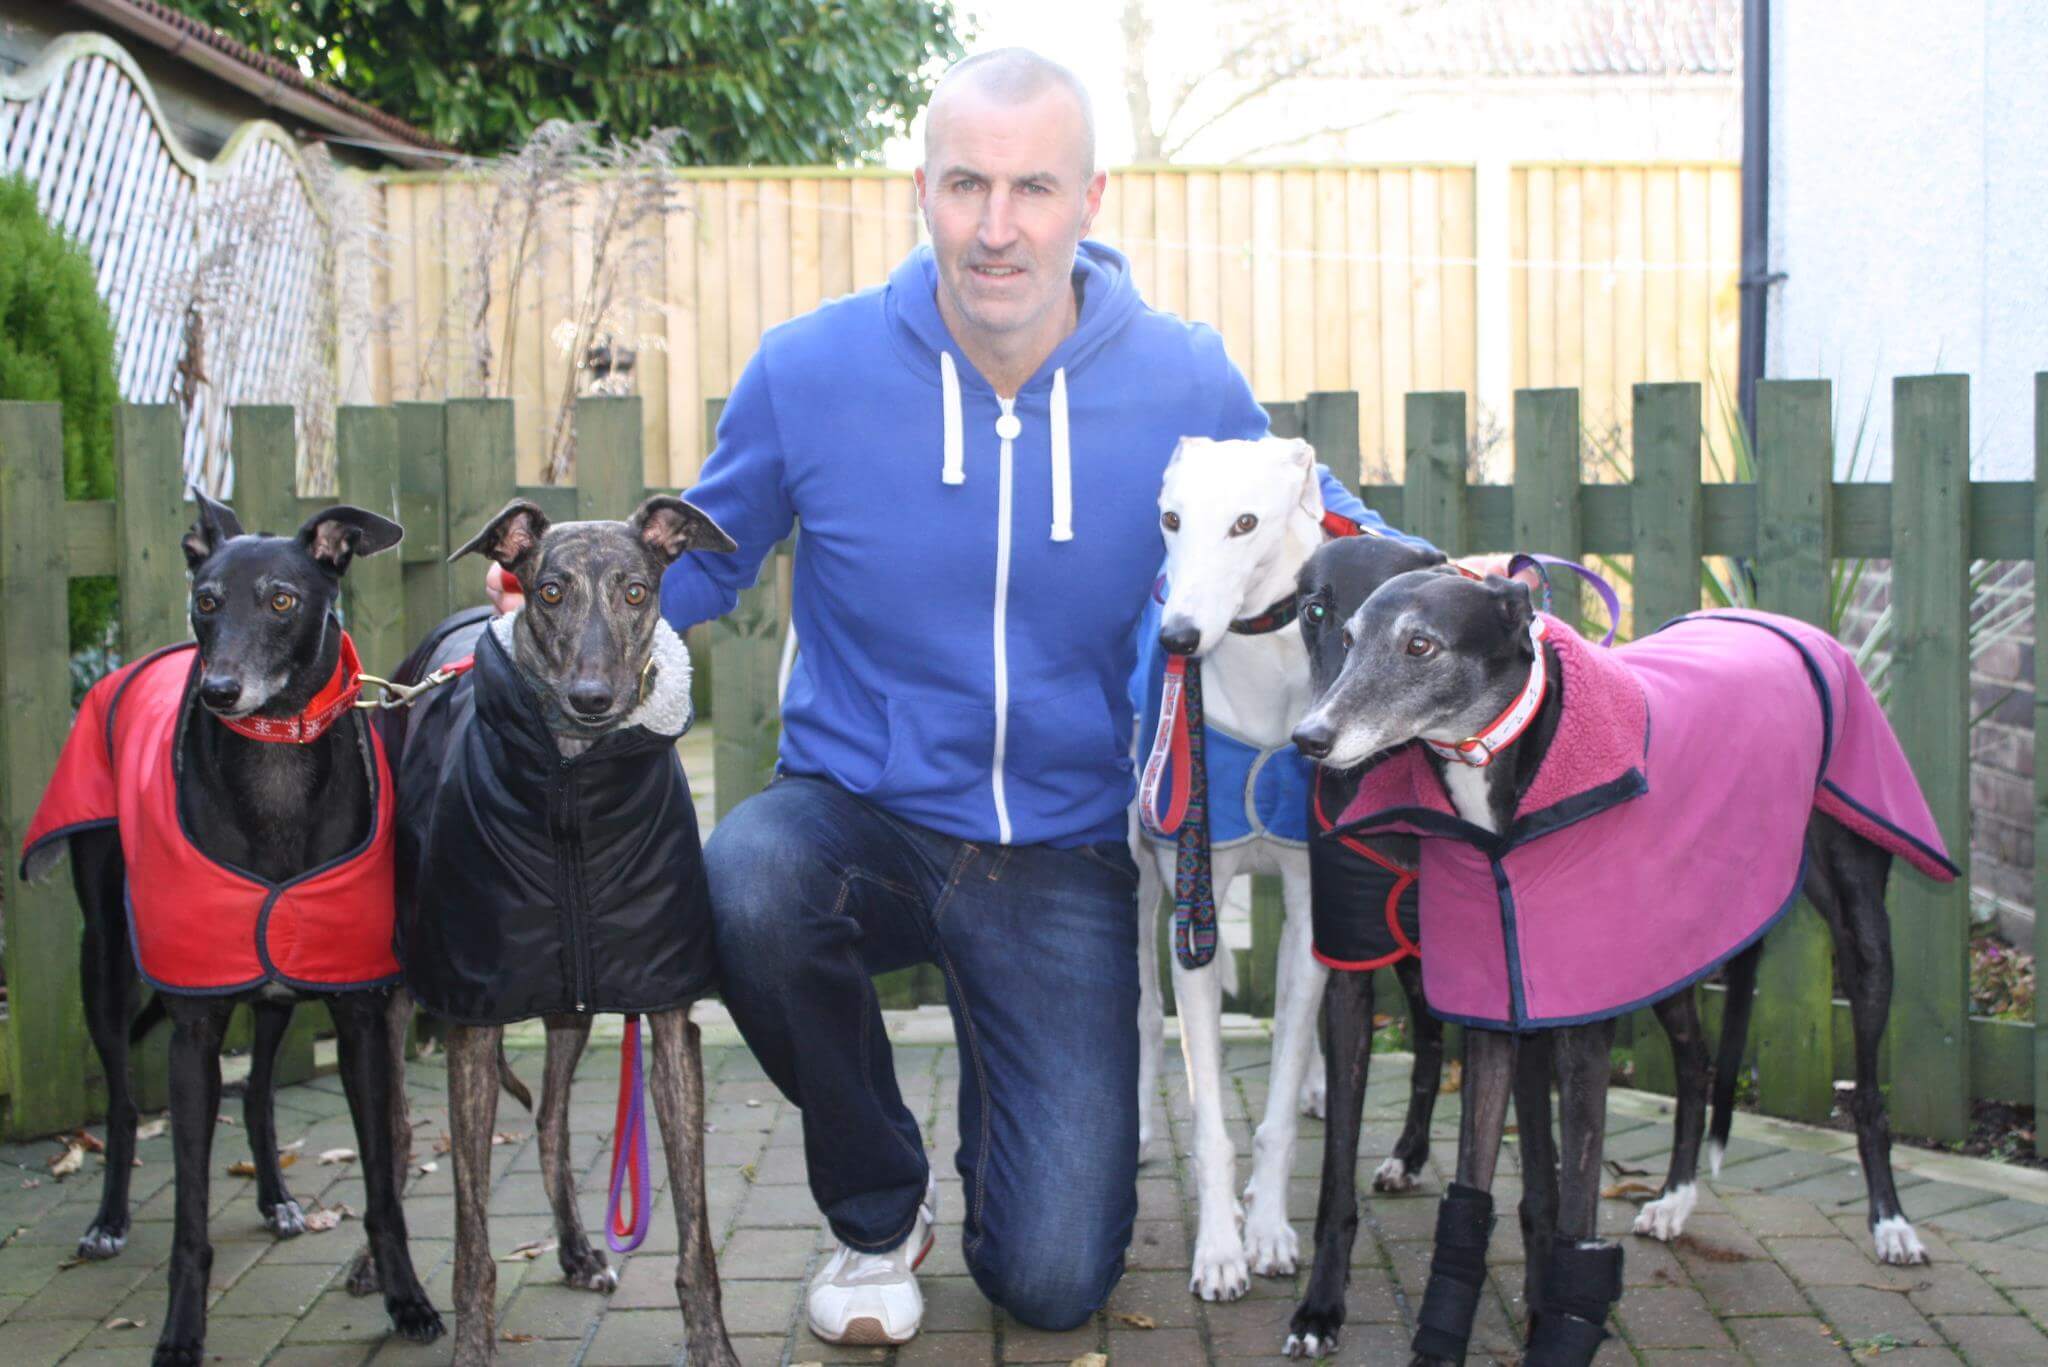 greyhound dogs as pets